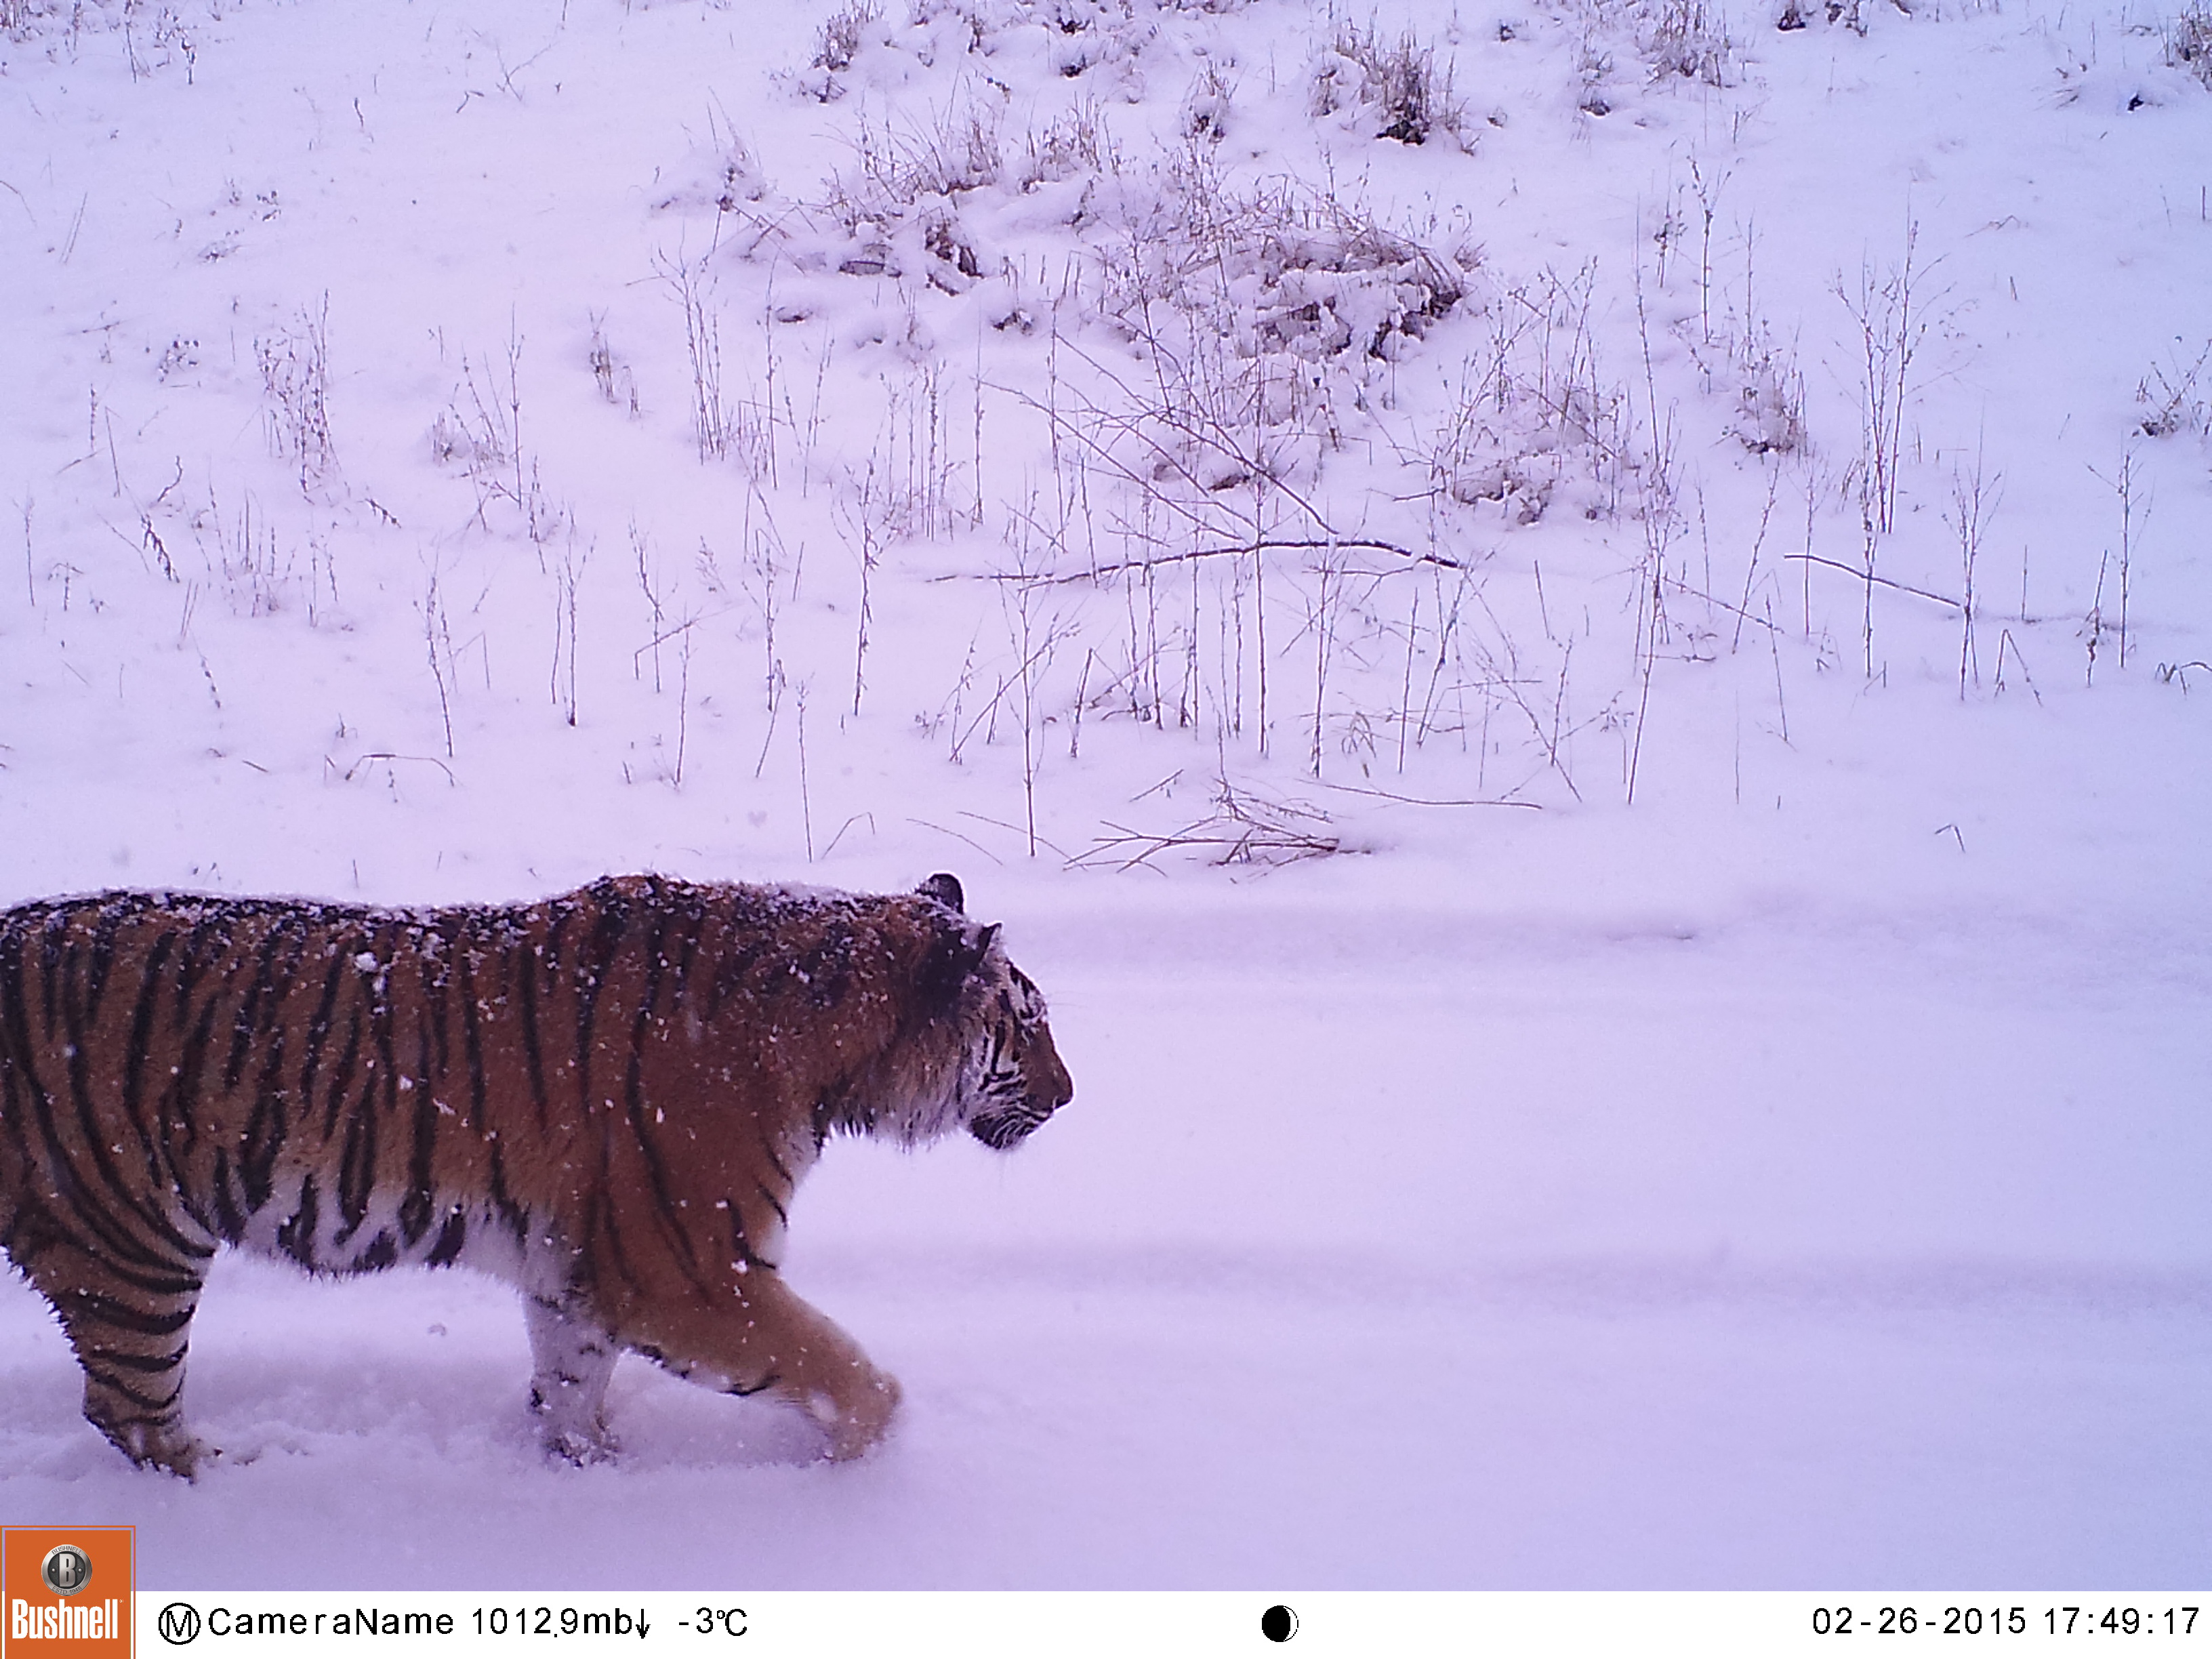 Top experts discussed ways to save the amur tiger